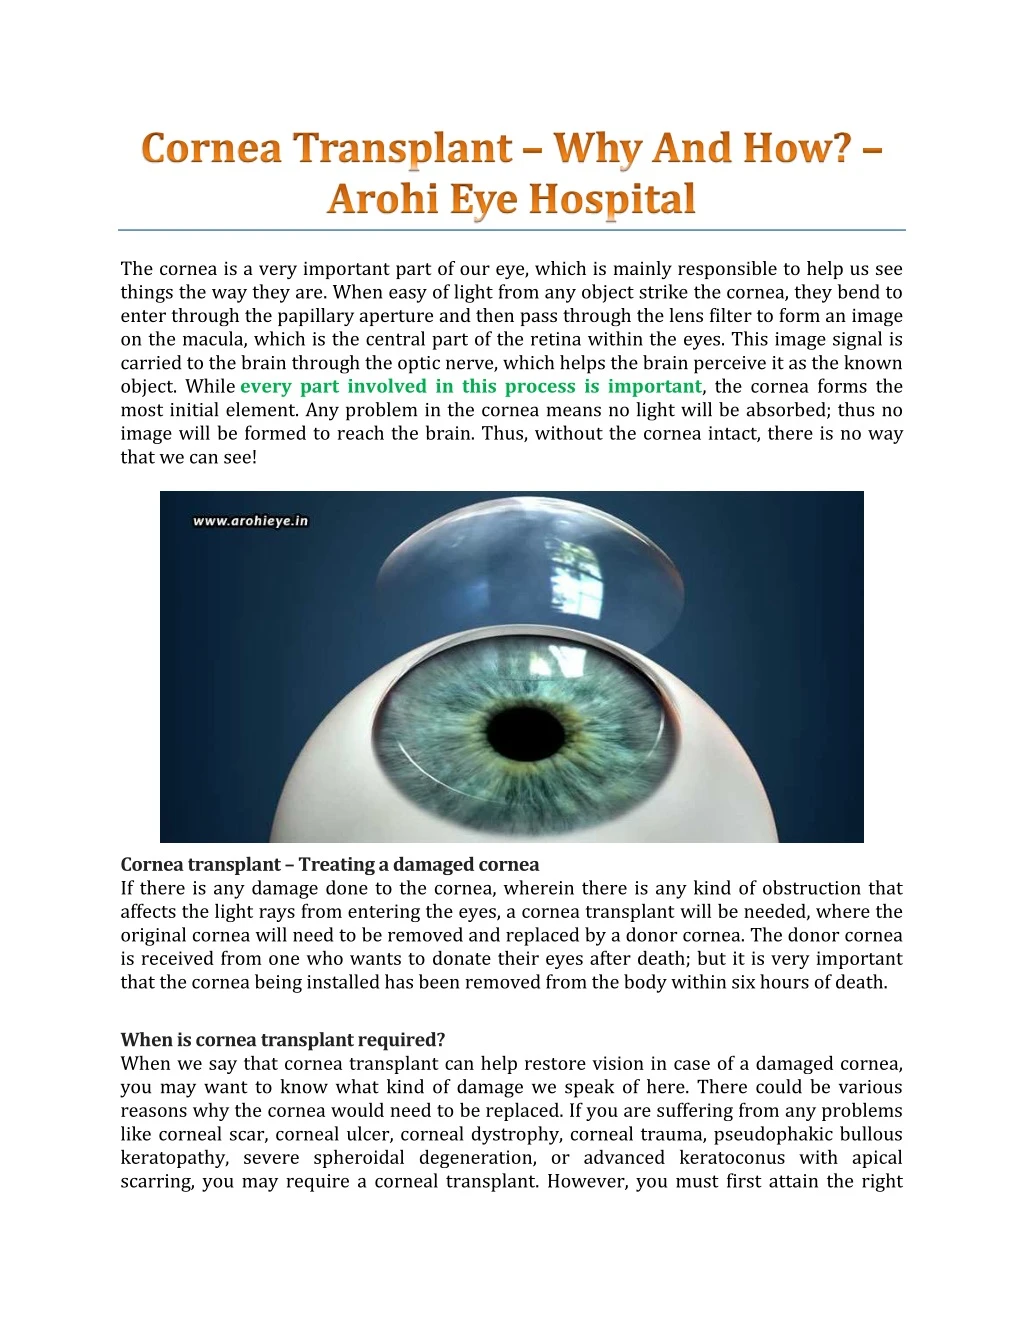 the cornea is a very important part